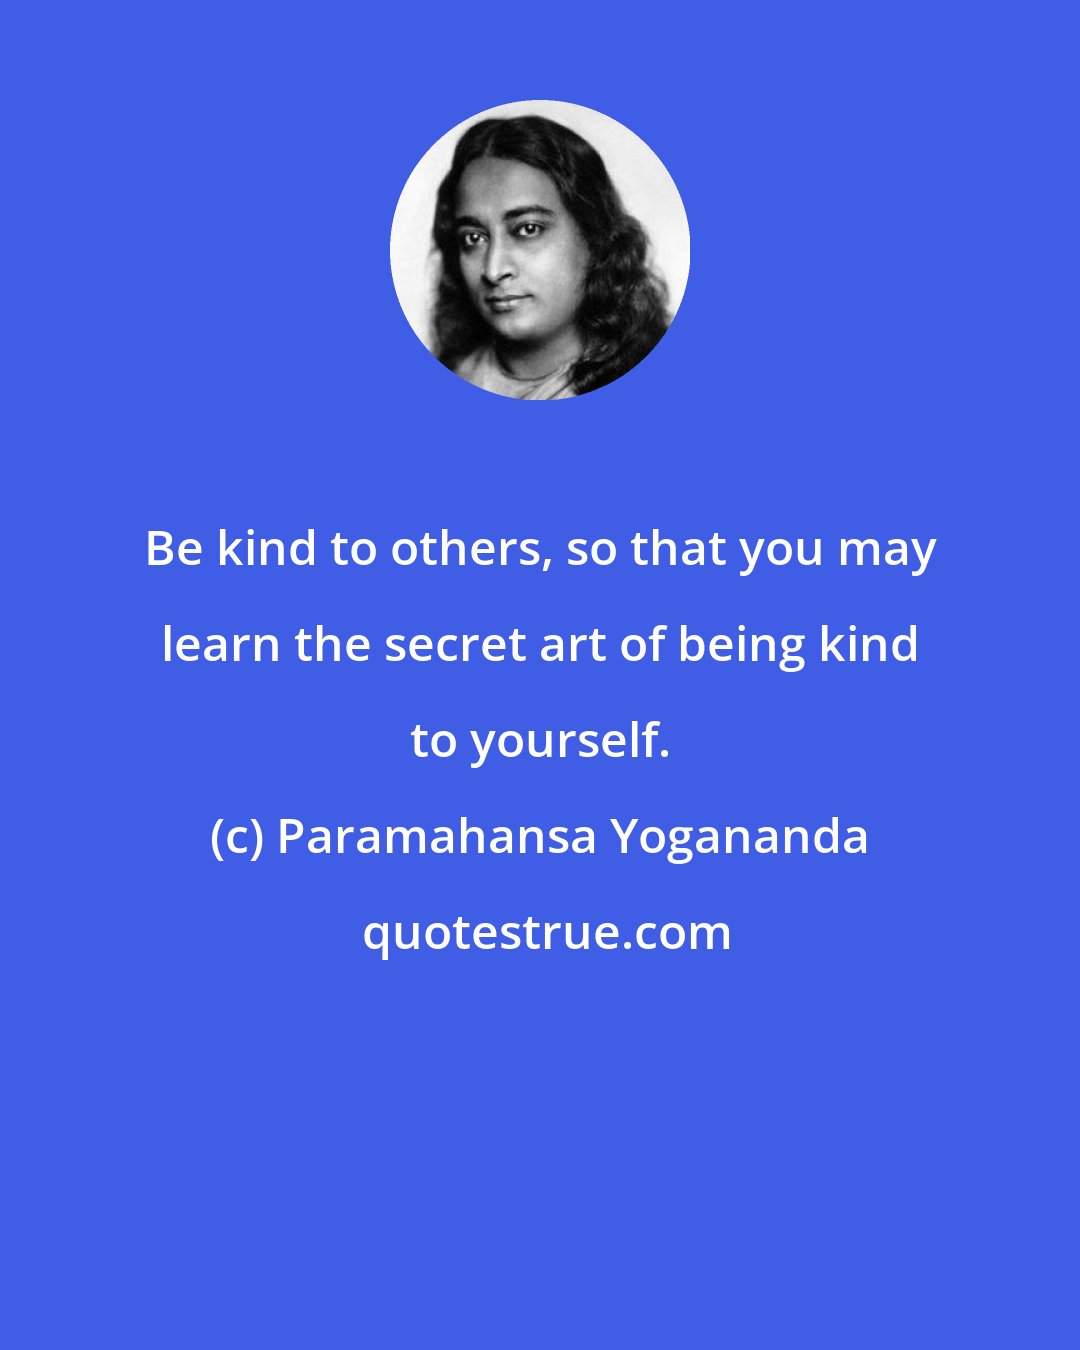 Paramahansa Yogananda: Be kind to others, so that you may learn the secret art of being kind to yourself.